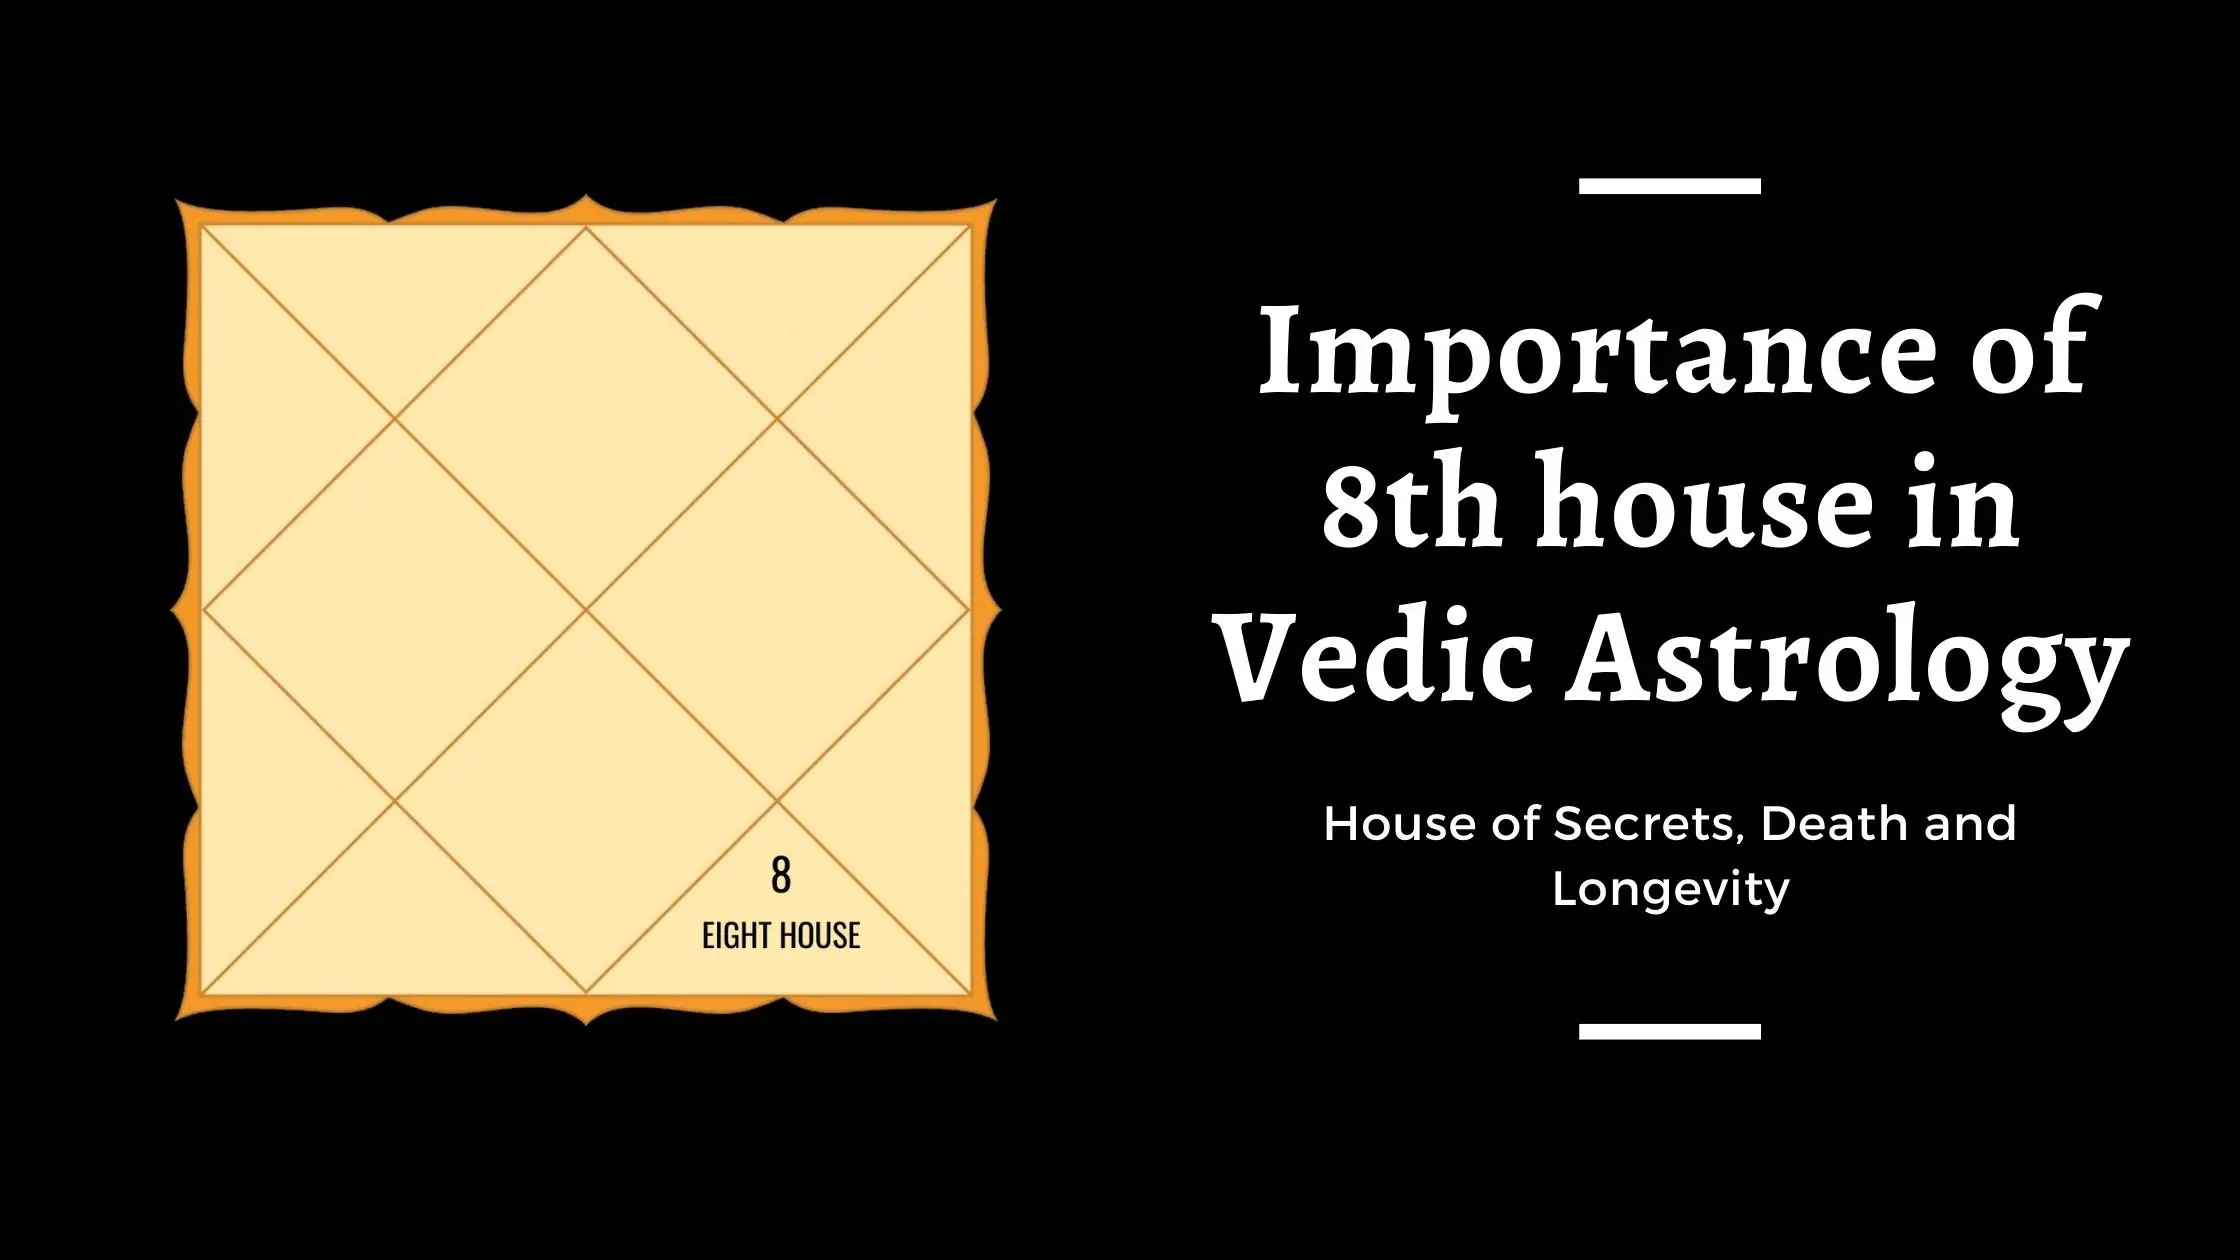 Importance of 8th house in Vedic Astrology